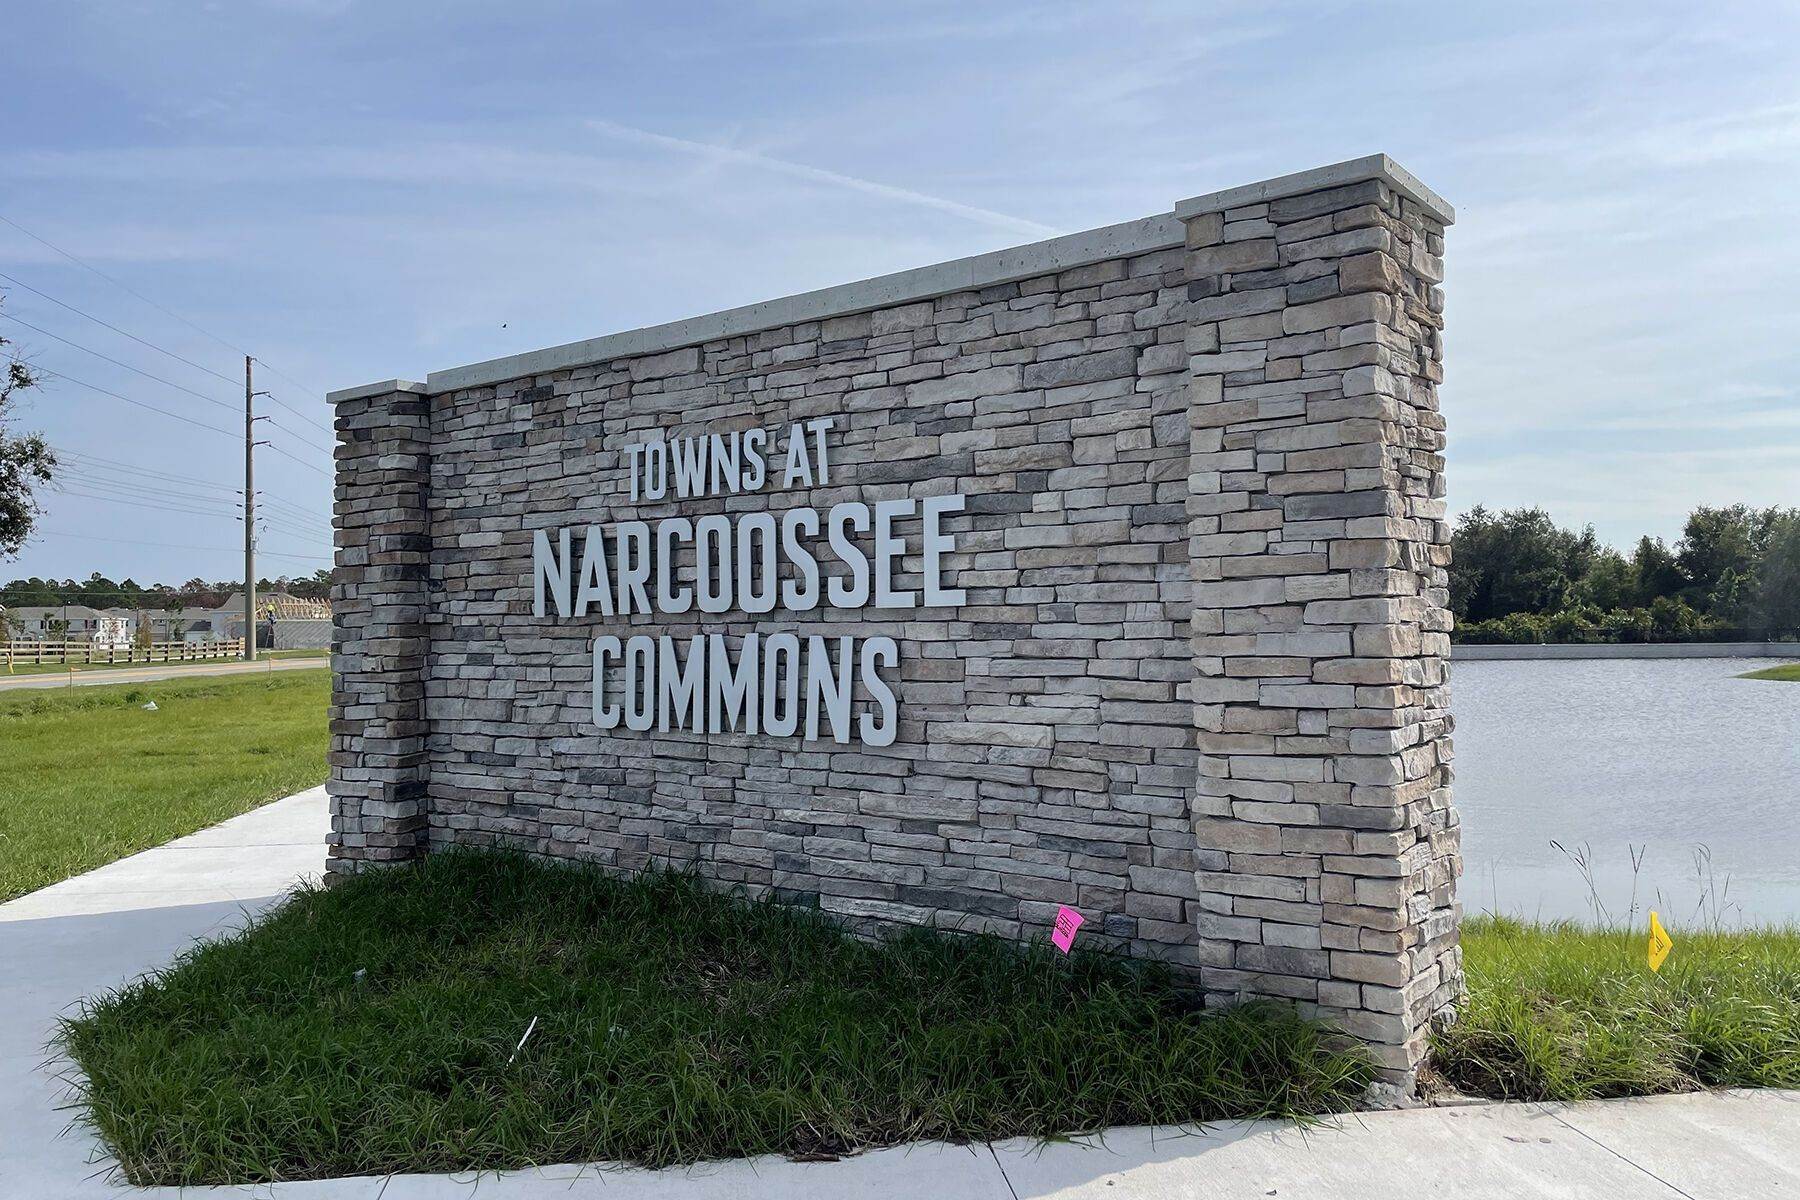 19. Towns at Narcoossee Commons building at 5601 Leon Tyson Road, St. Cloud, FL 34771